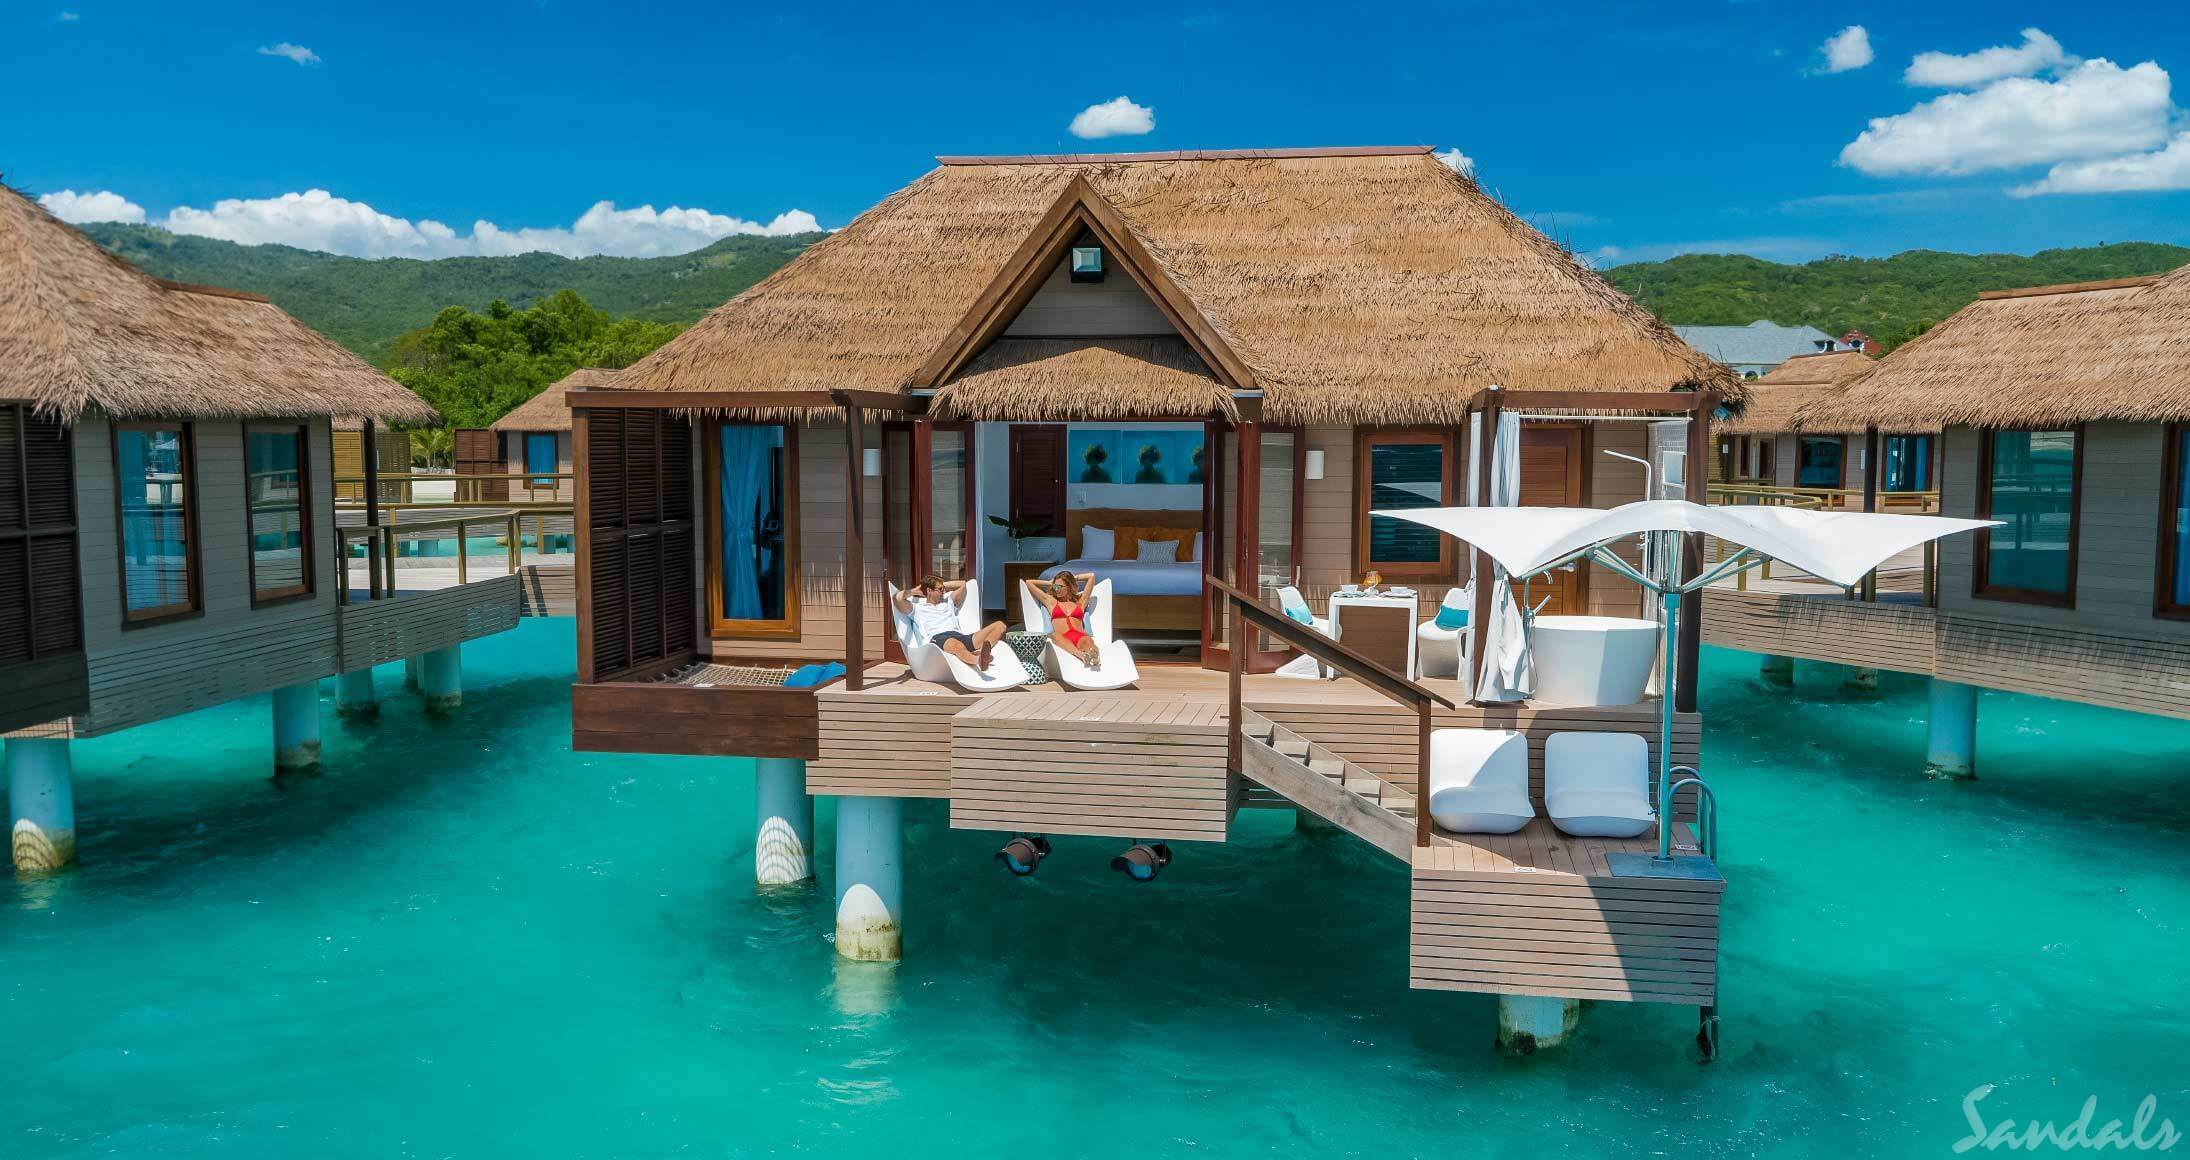 Couple relaxing at their overwater bungalow in the Caribbean at Sandals Grande St. Lucia.